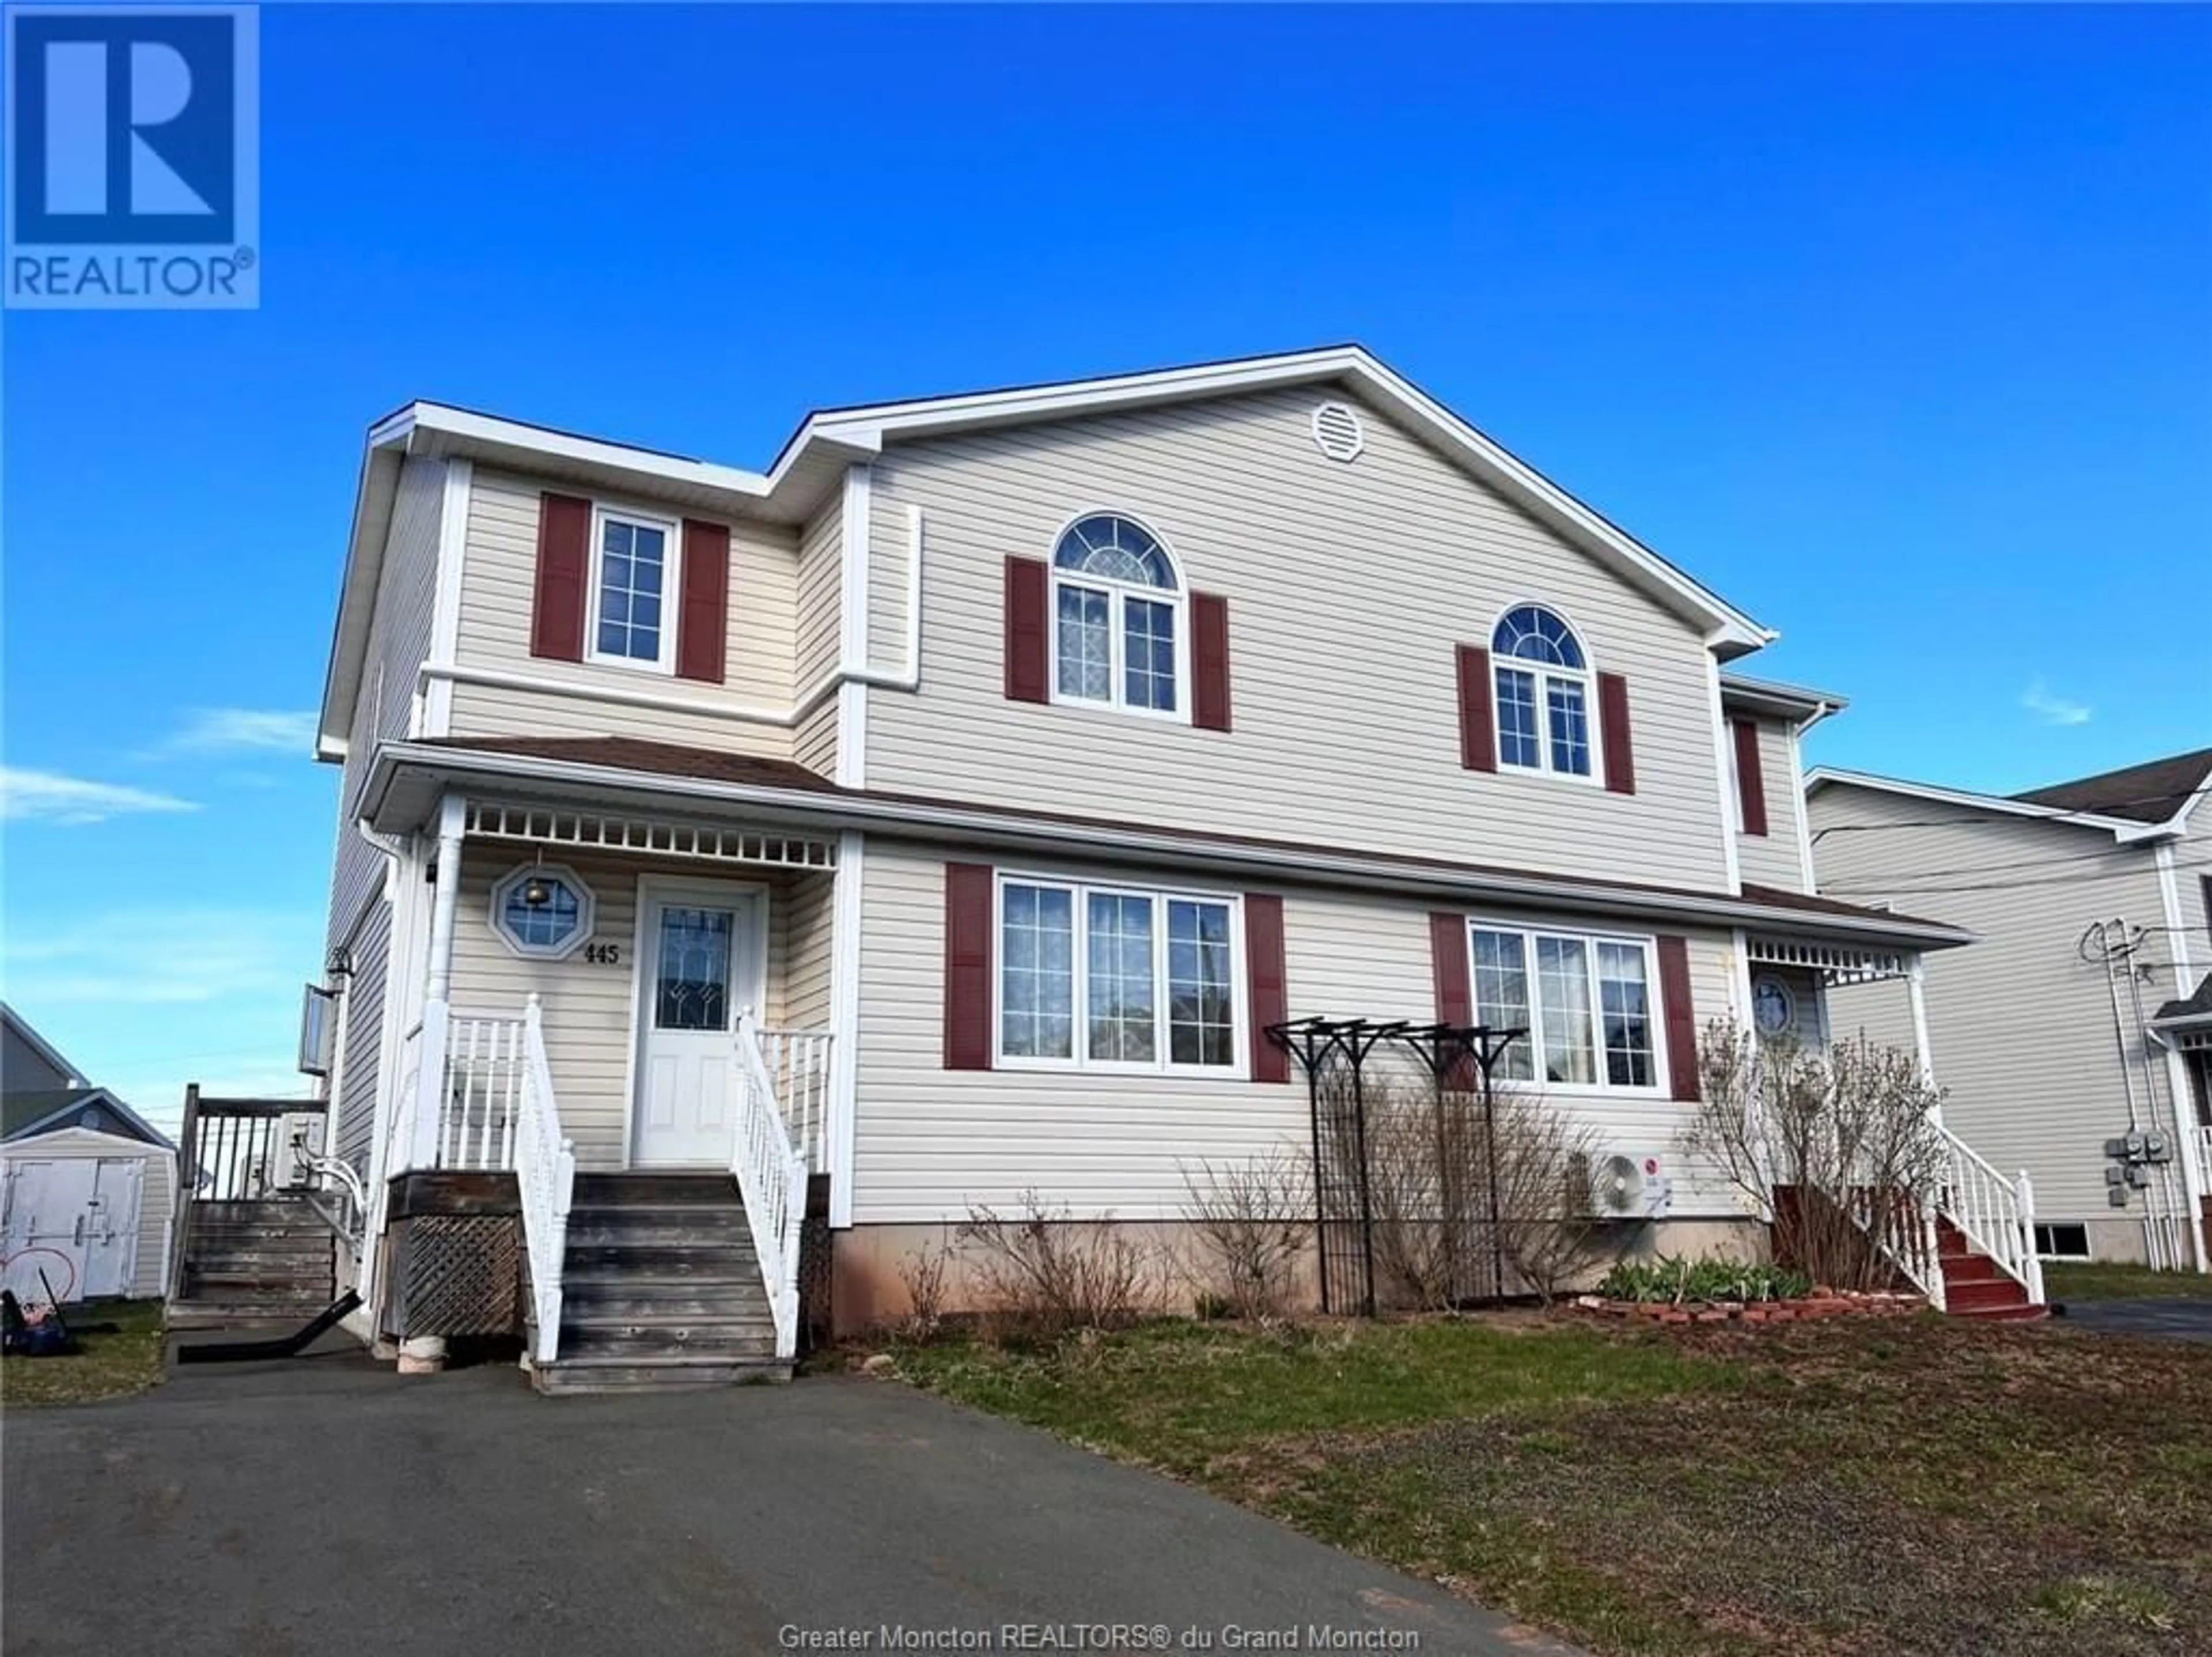 Frontside or backside of a home for 445 Twin Oaks DR, Moncton New Brunswick E1G0G2